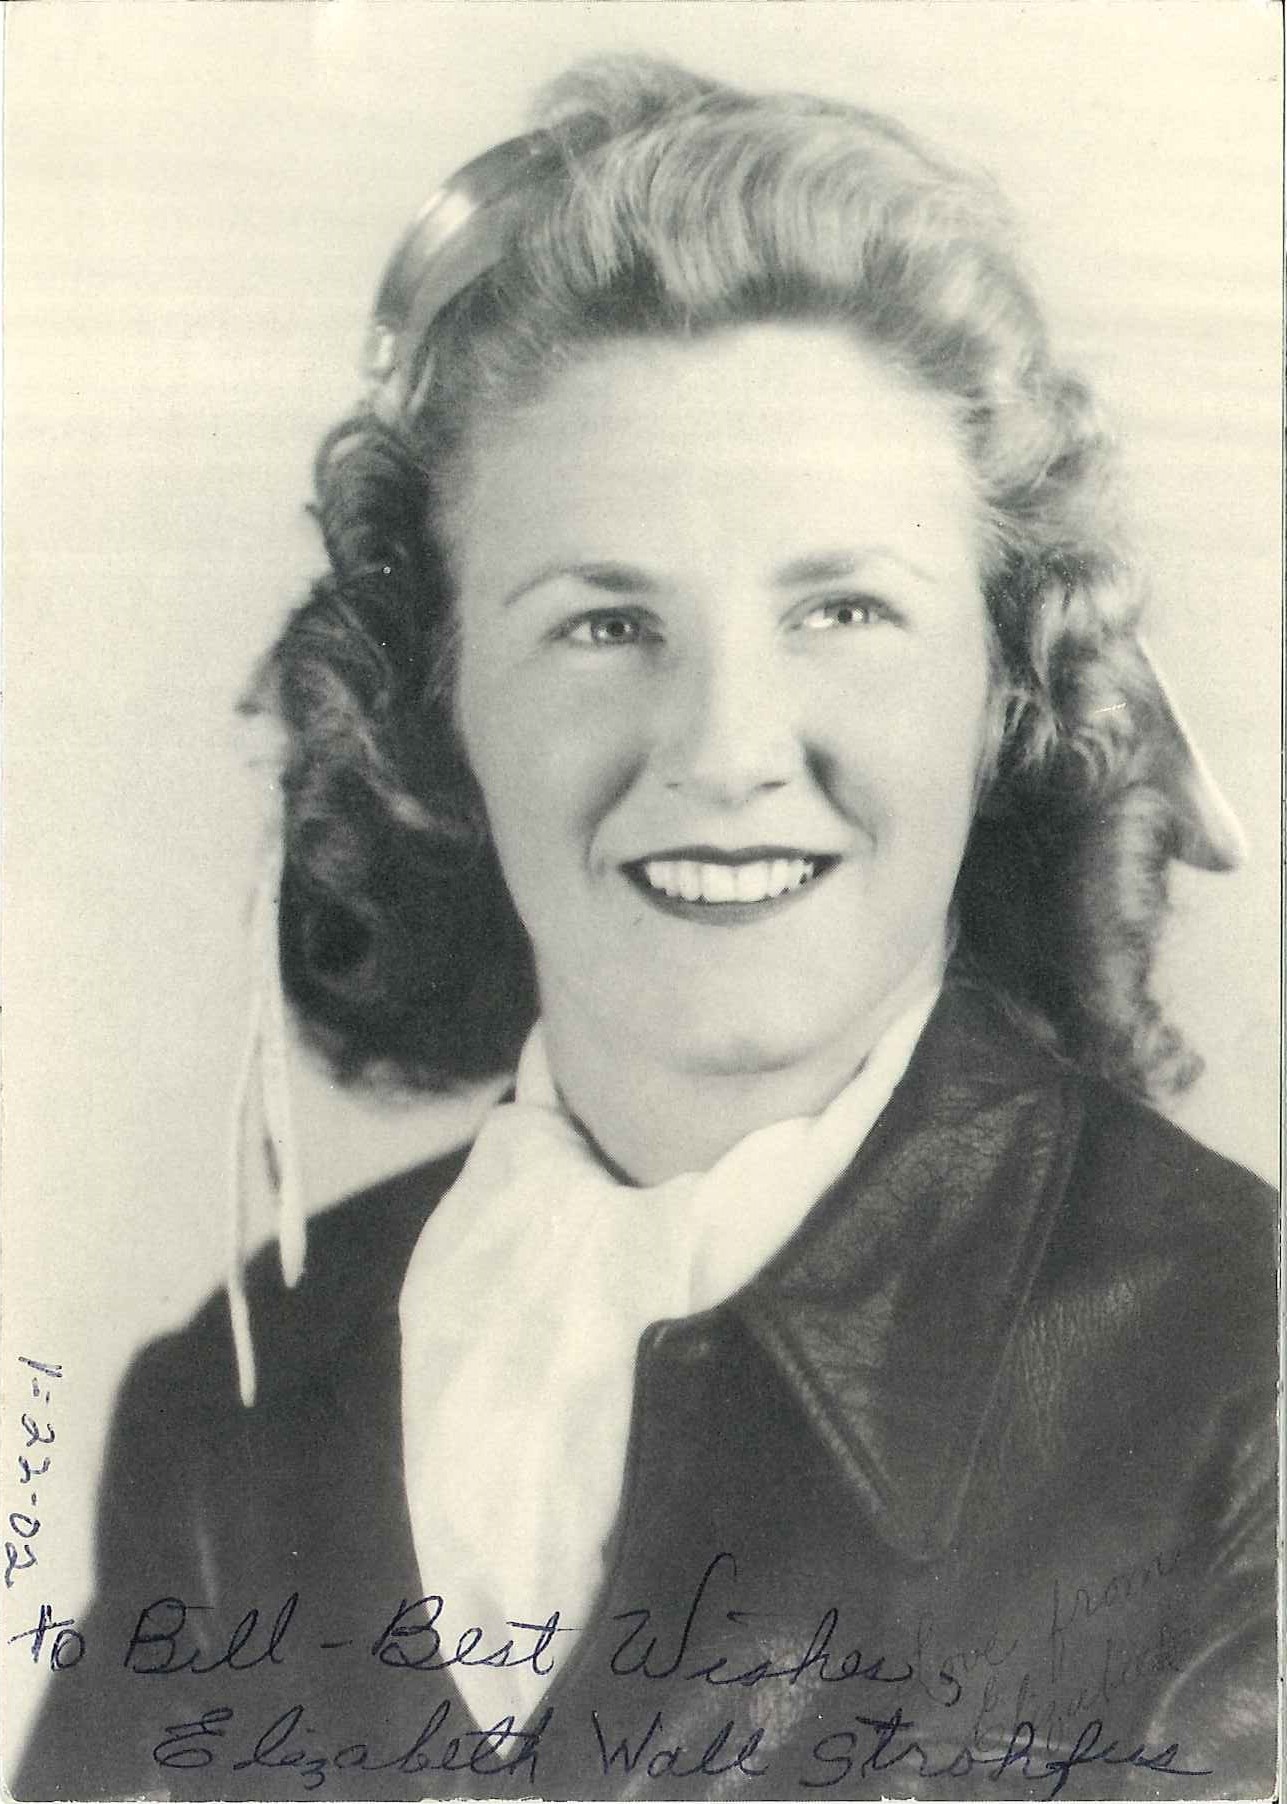 Elizabeth “Betty” Wall in her leather flight jacket. Historic black and white photograph taken in 1940s. Signed TO Bill Best Wishes Elizabeth Wall Strohfus.